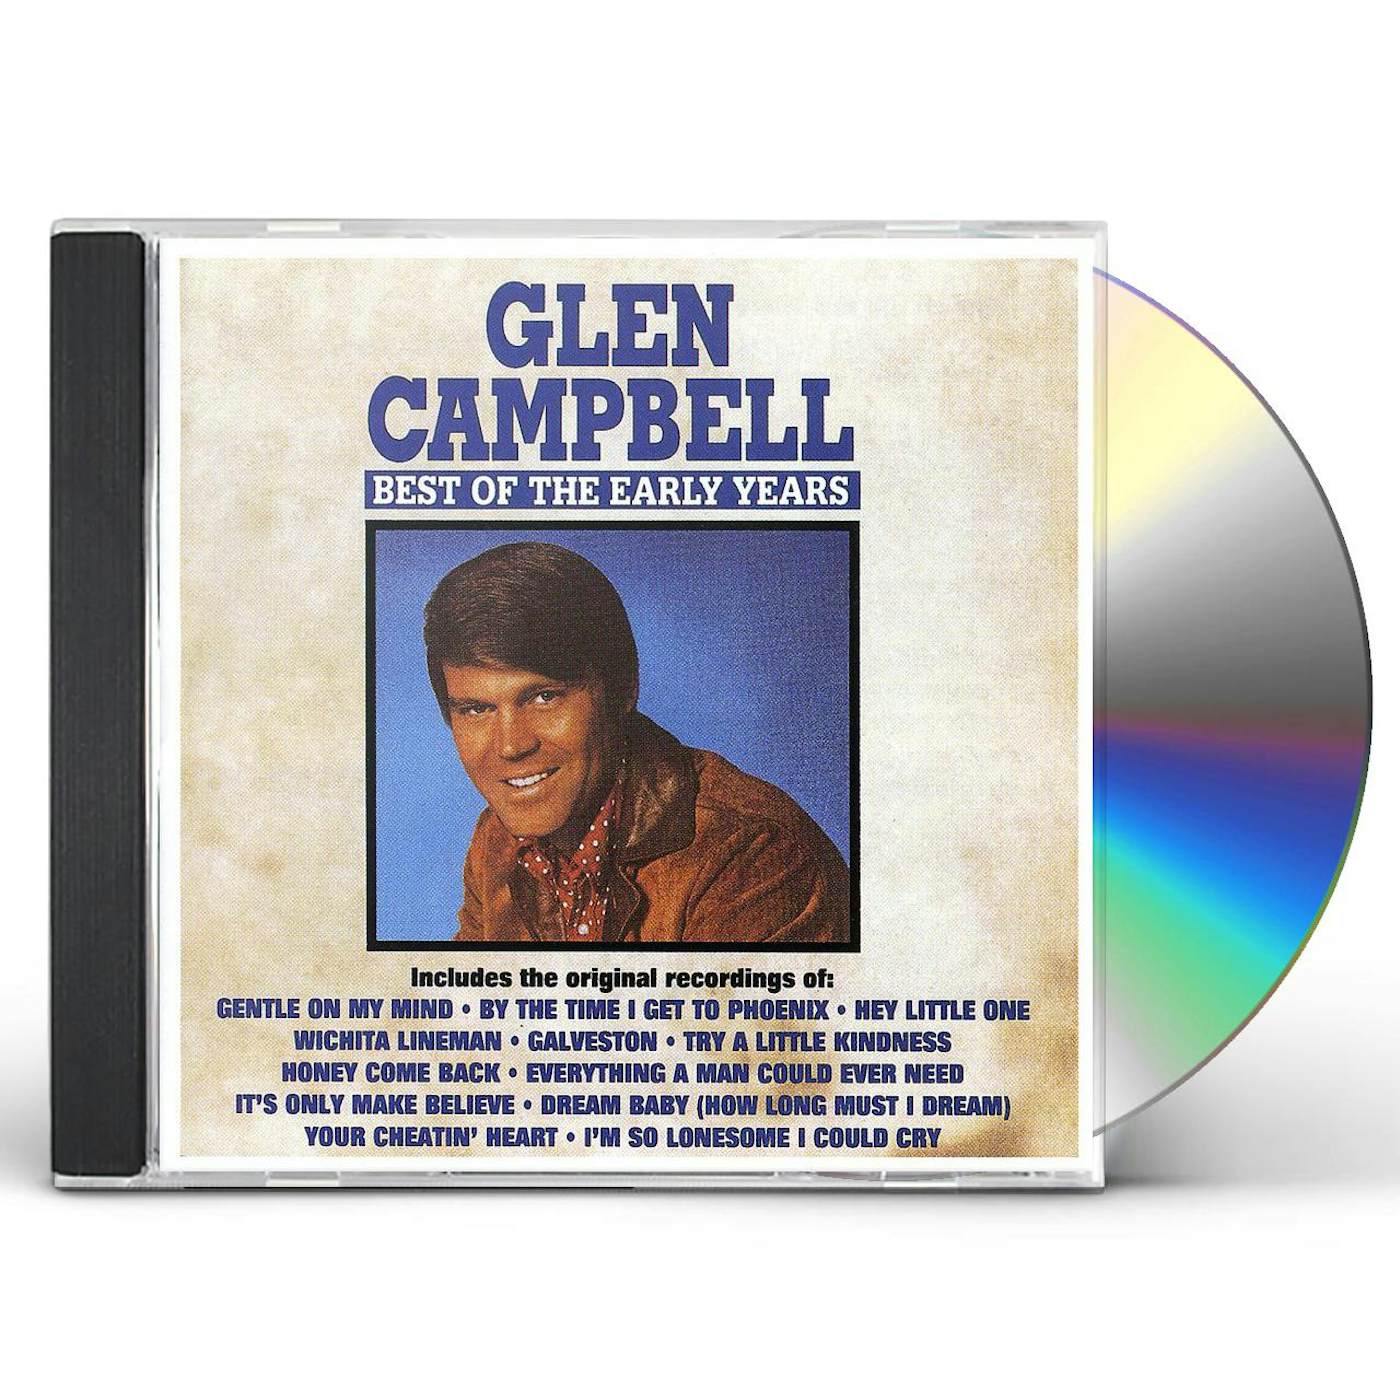 Glen Campbell BEST OF THE EARLY YEARS CD